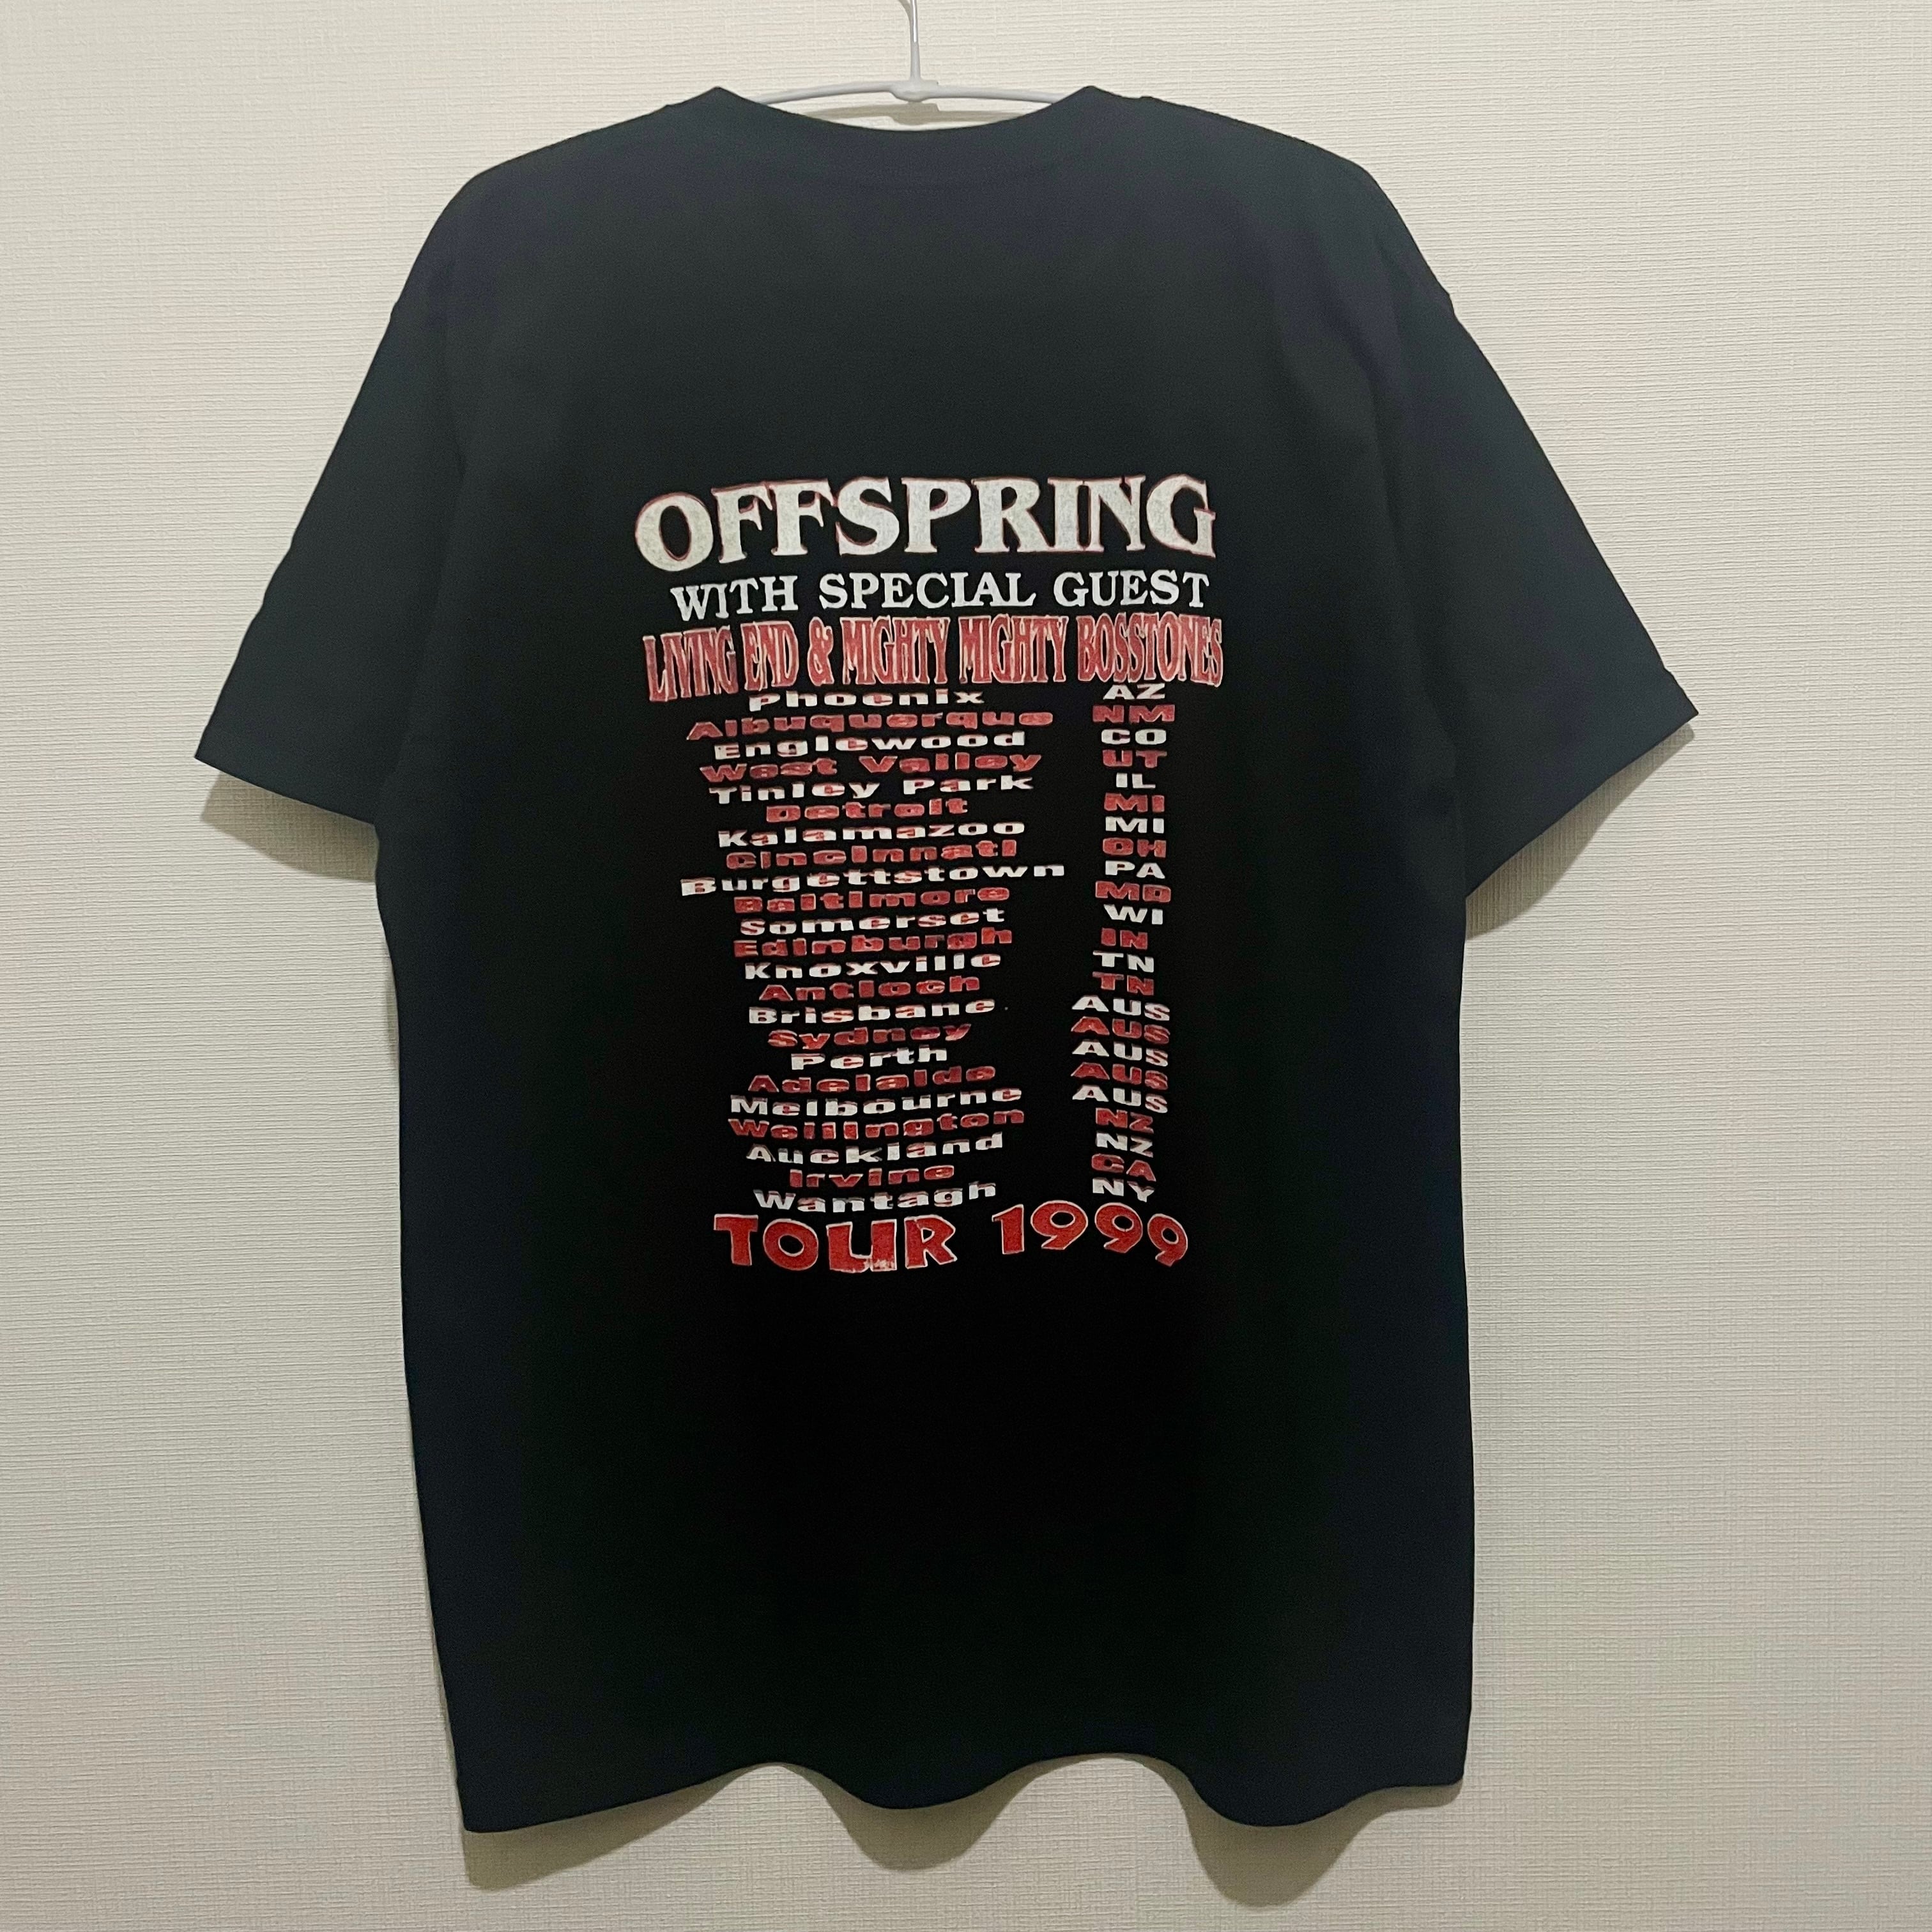 THE OFFSPRING Tシャツ TOUR 1999 オフスプリング Tee | BF MERCH'S